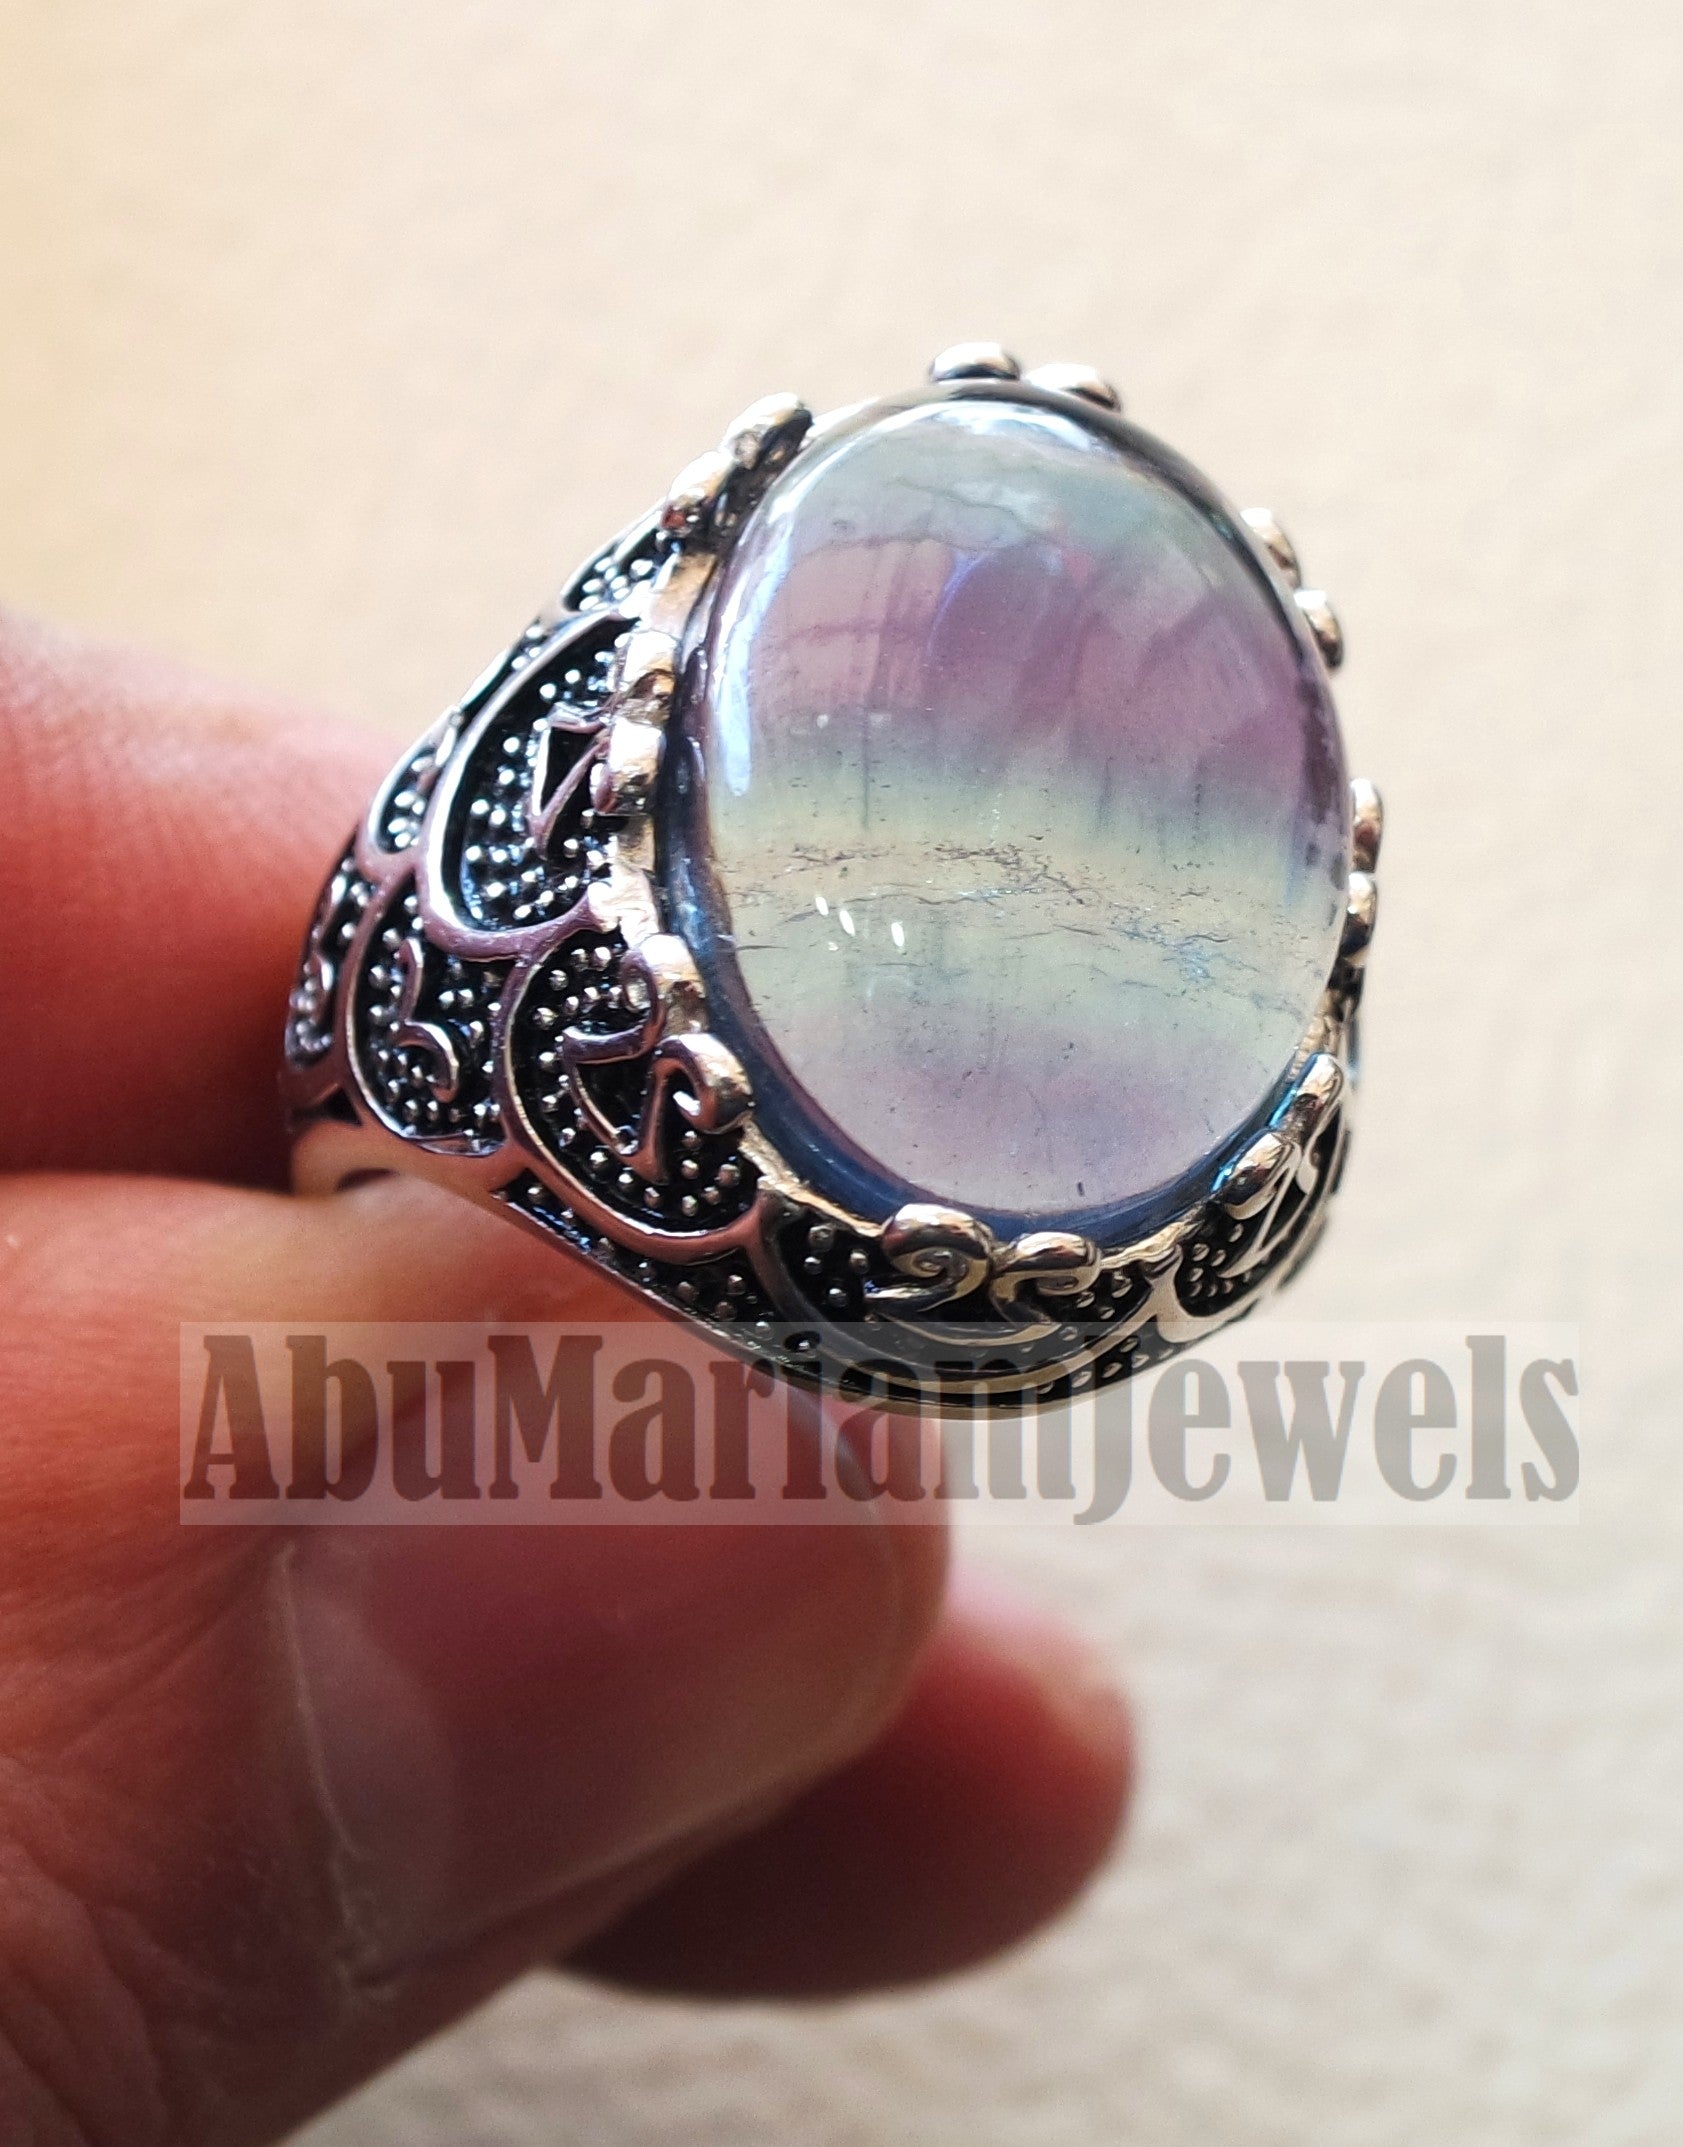 natural multi color fluorite purple blue green men ring sterling silver 925 unique stone all sizes jewelry fast shipping oxidized style